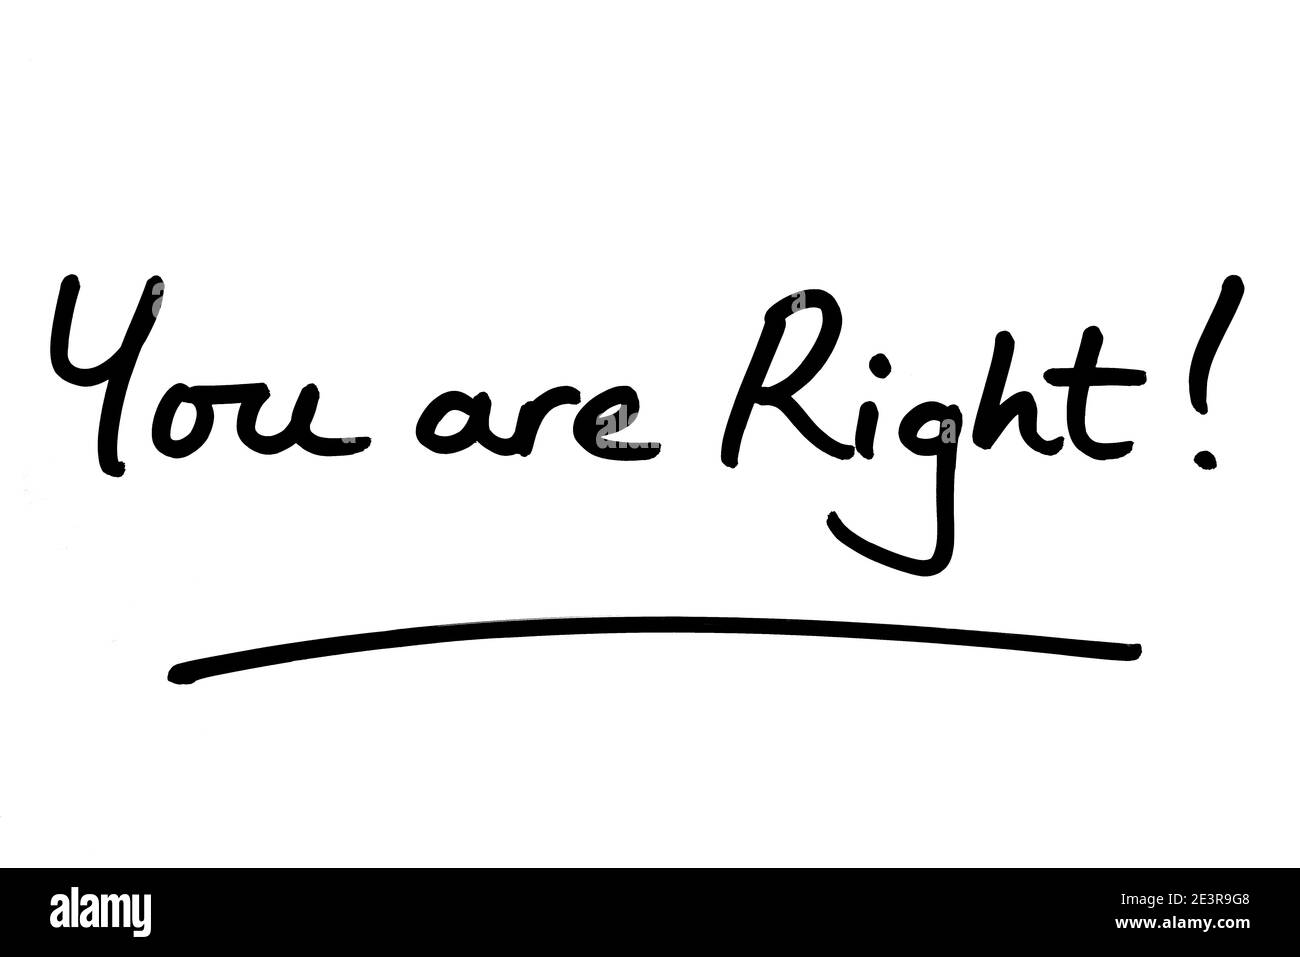 You are Right! handwritten on a white background. Stock Photo